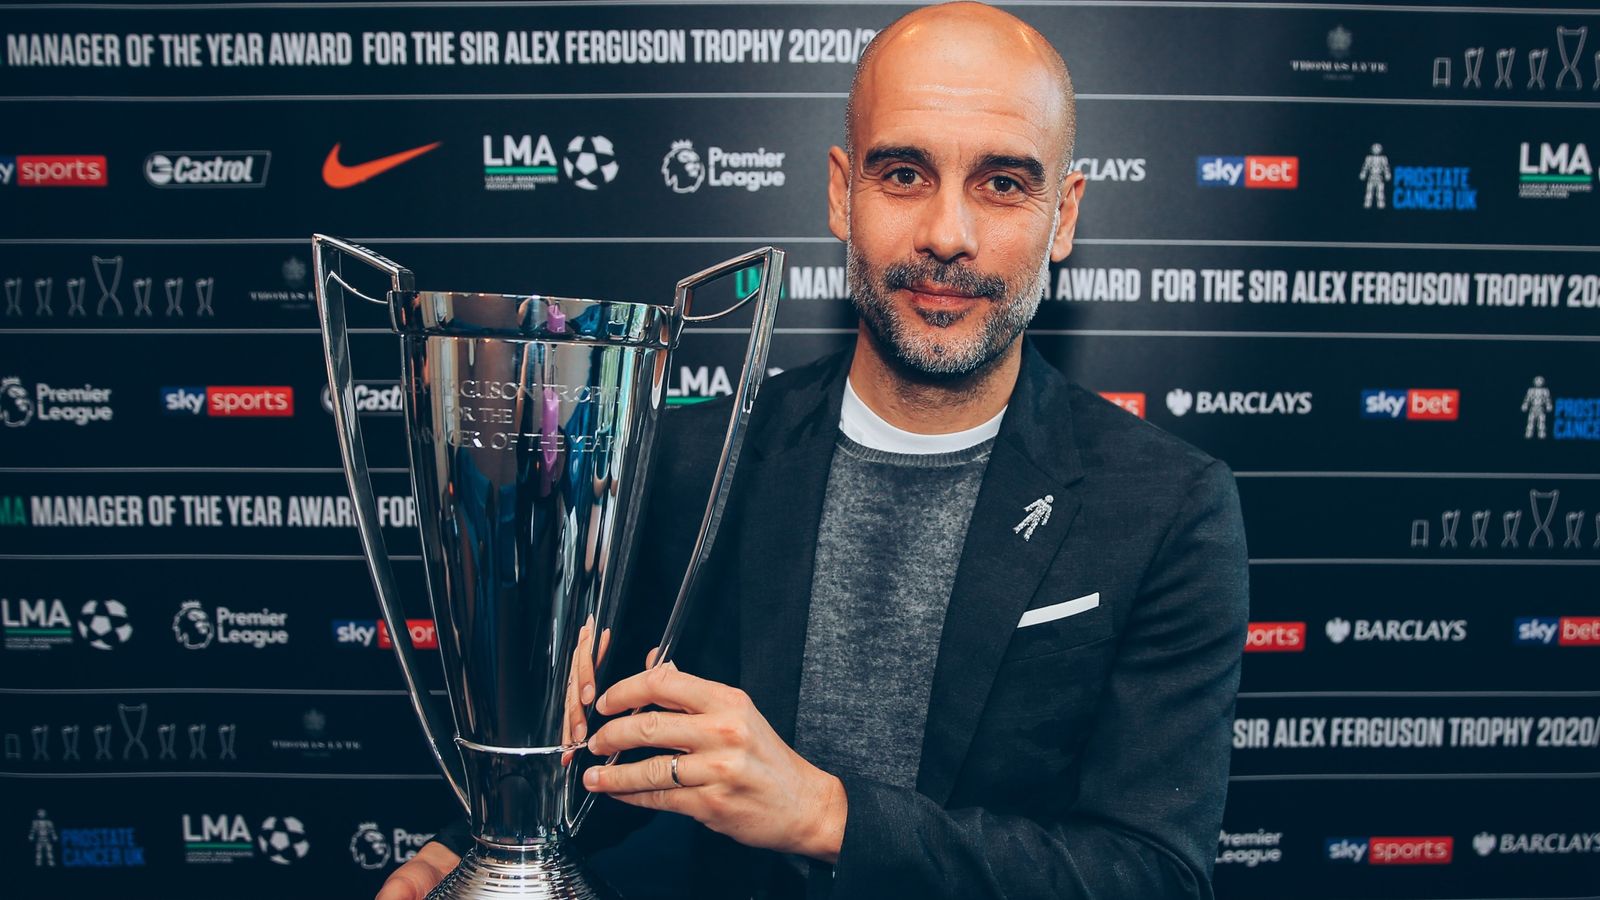 Pep Guardiola named LMA Manager of the Year